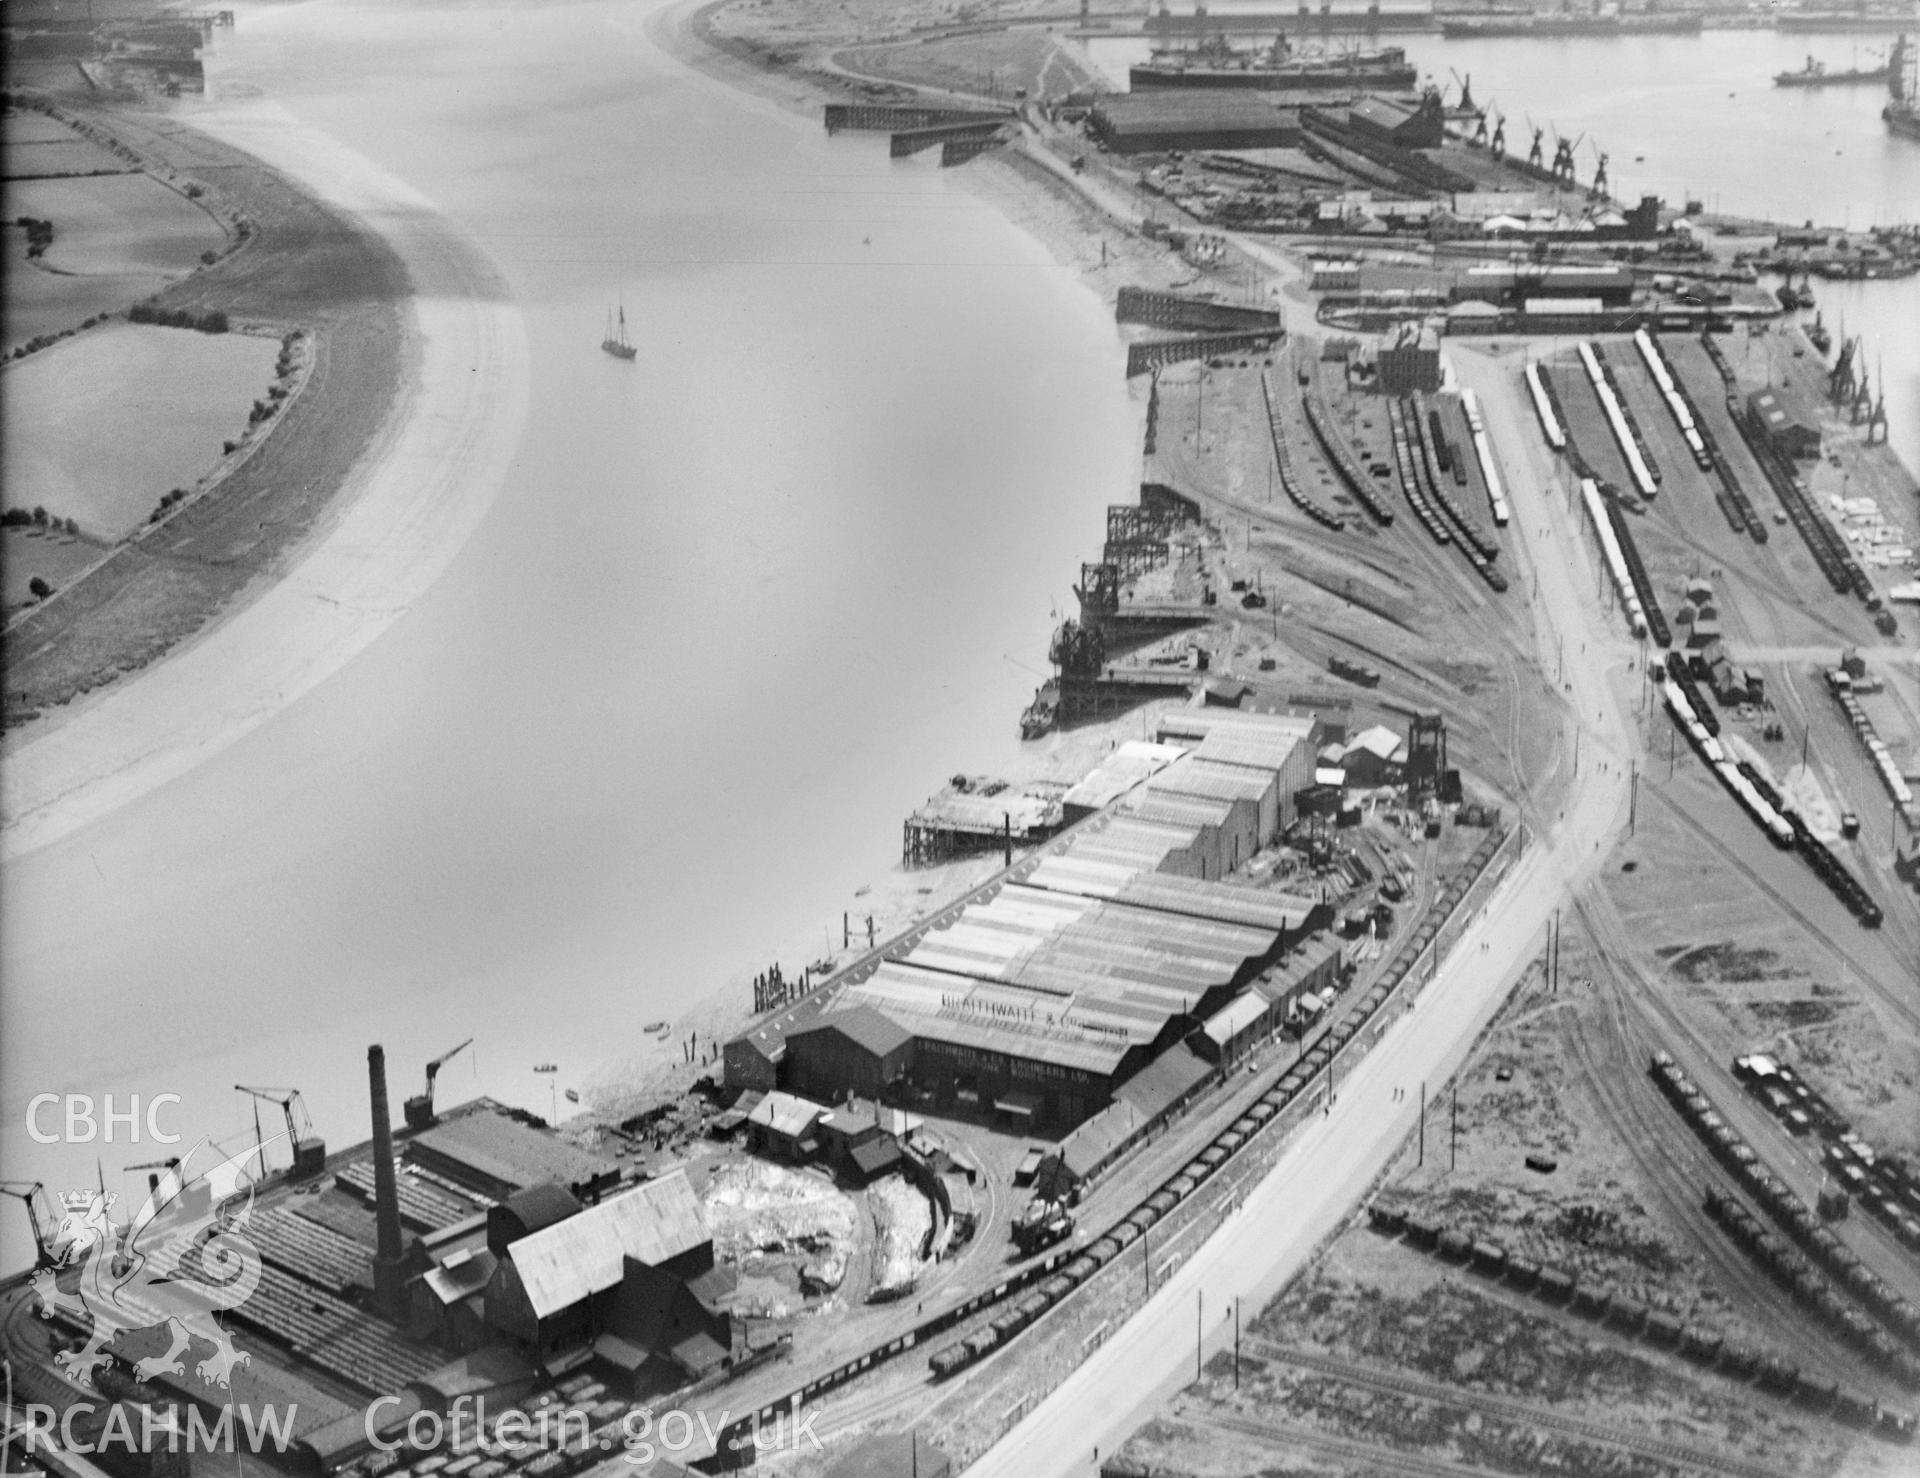 Braithwaite & Co., and view of transporter bridge, Newport, oblique aerial view. 5?x4? black and white glass plate negative.